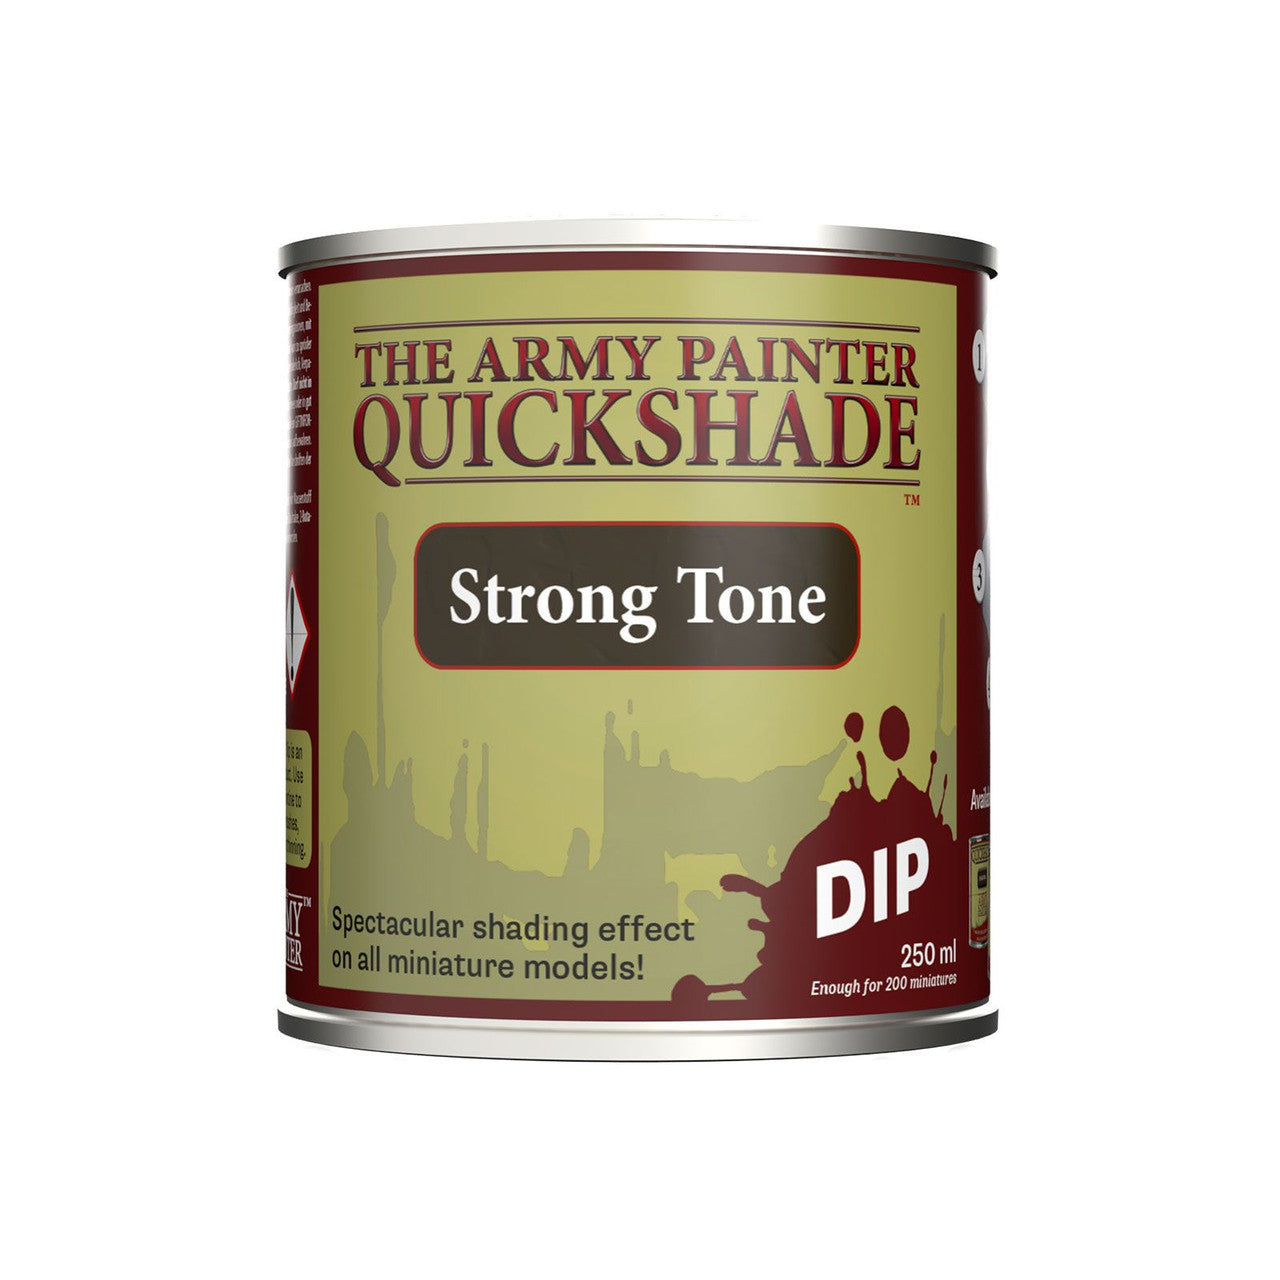 The Army Painter: Quickshade - Strong Tone